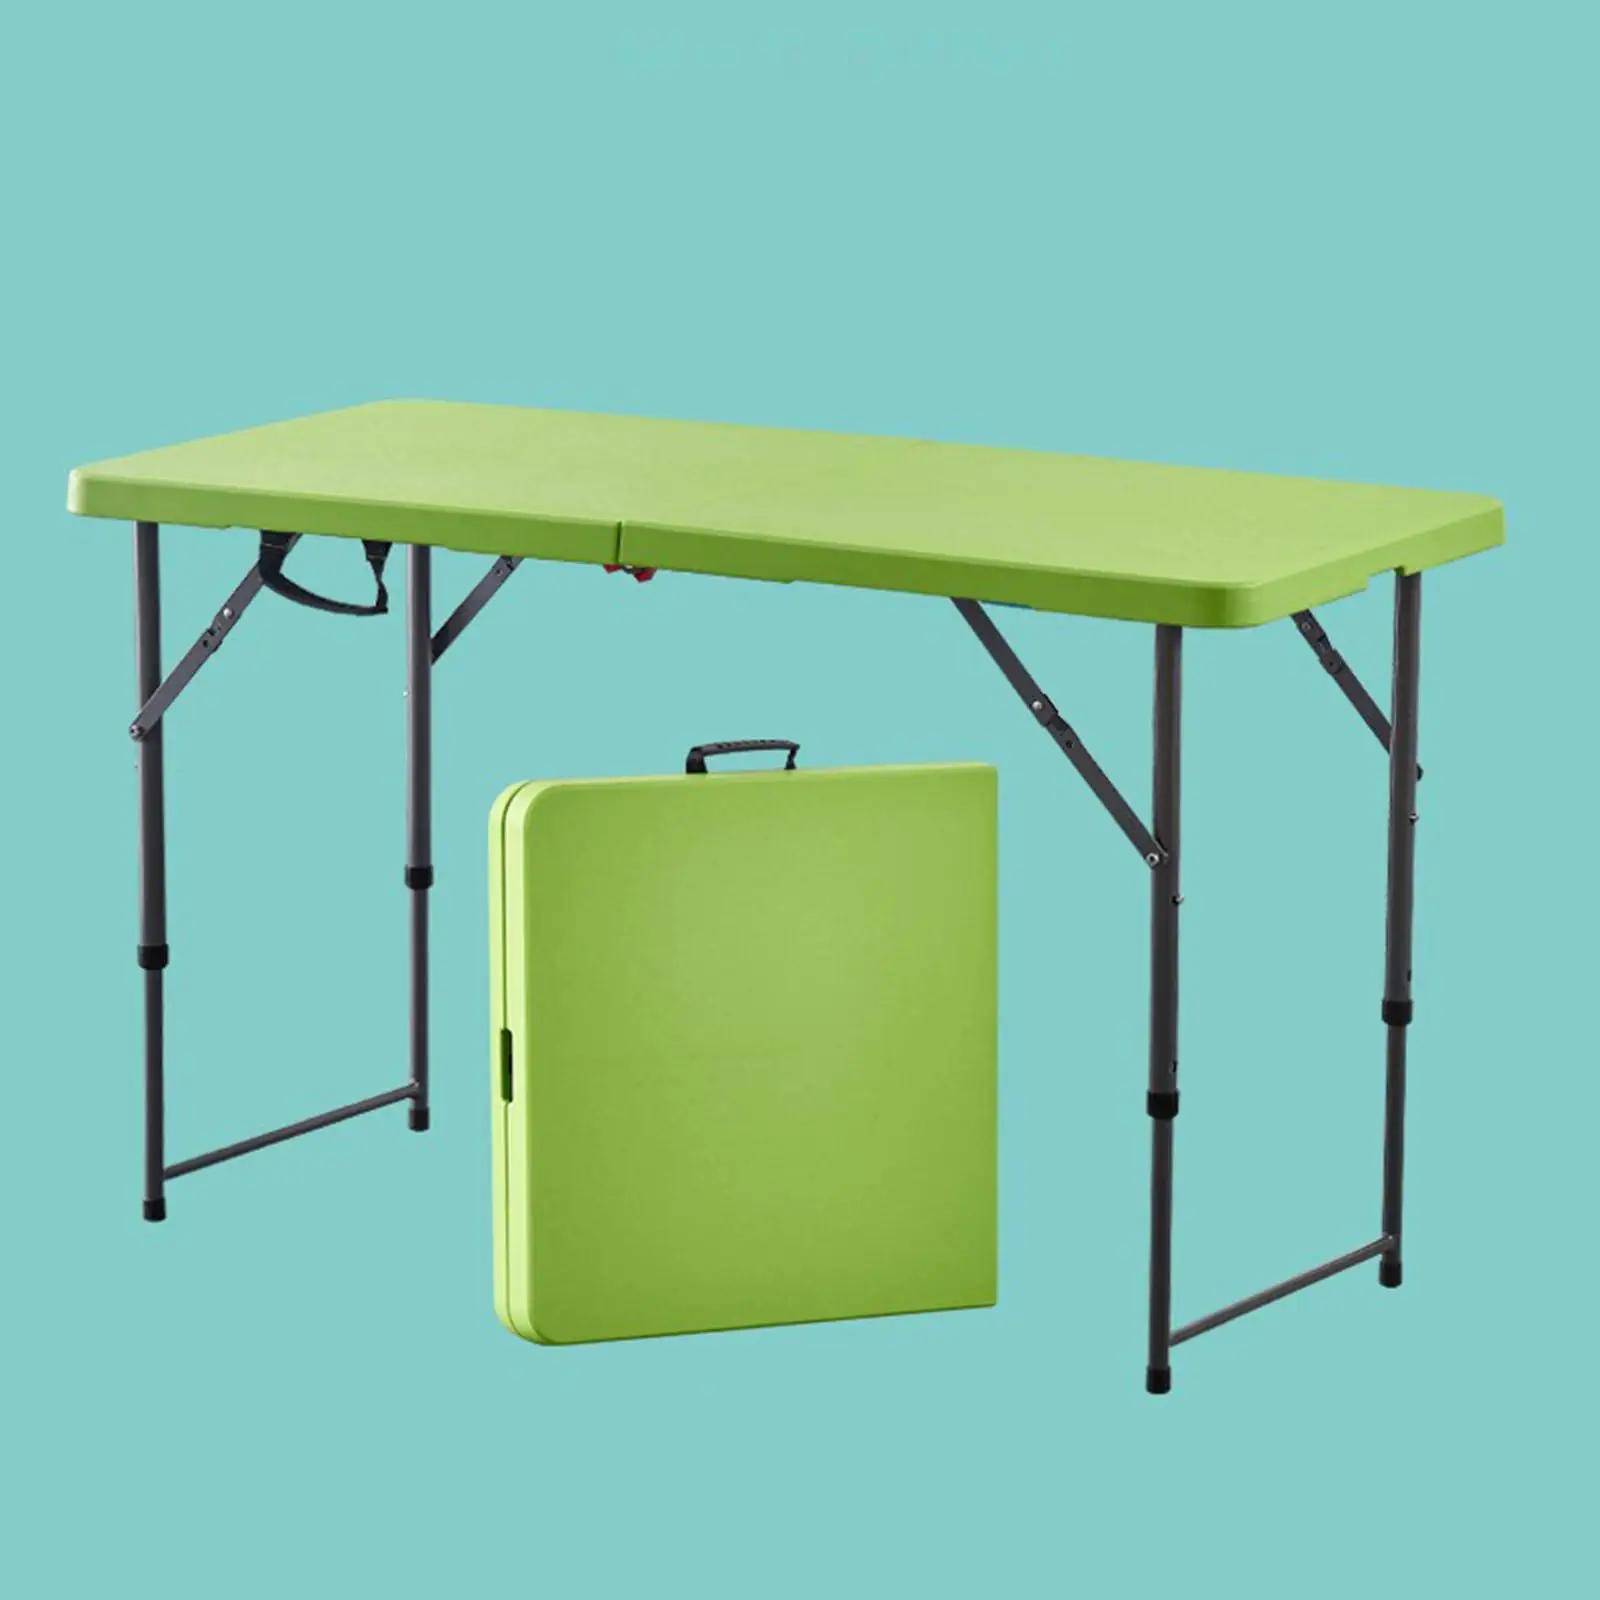 Outdoor Camping Folding Table Outdoor BBQ Table Picnic Table Easy to Clean Tabletop Surface for Camping Garden Picnics Kitchen